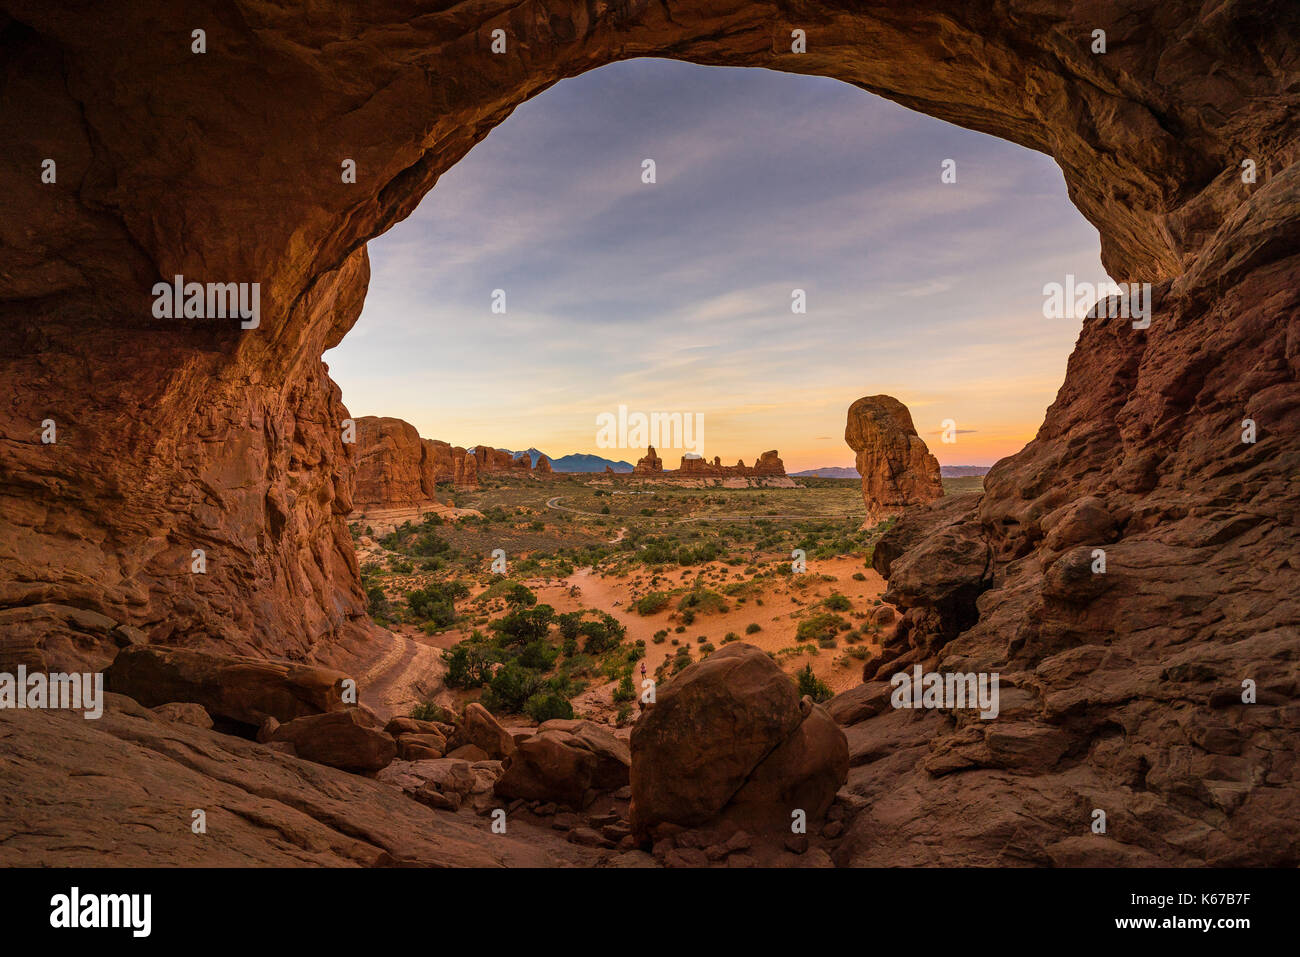 View through Double Arch, Parade of Elephants Trail, Arches National Park, Utah, United States Stock Photo